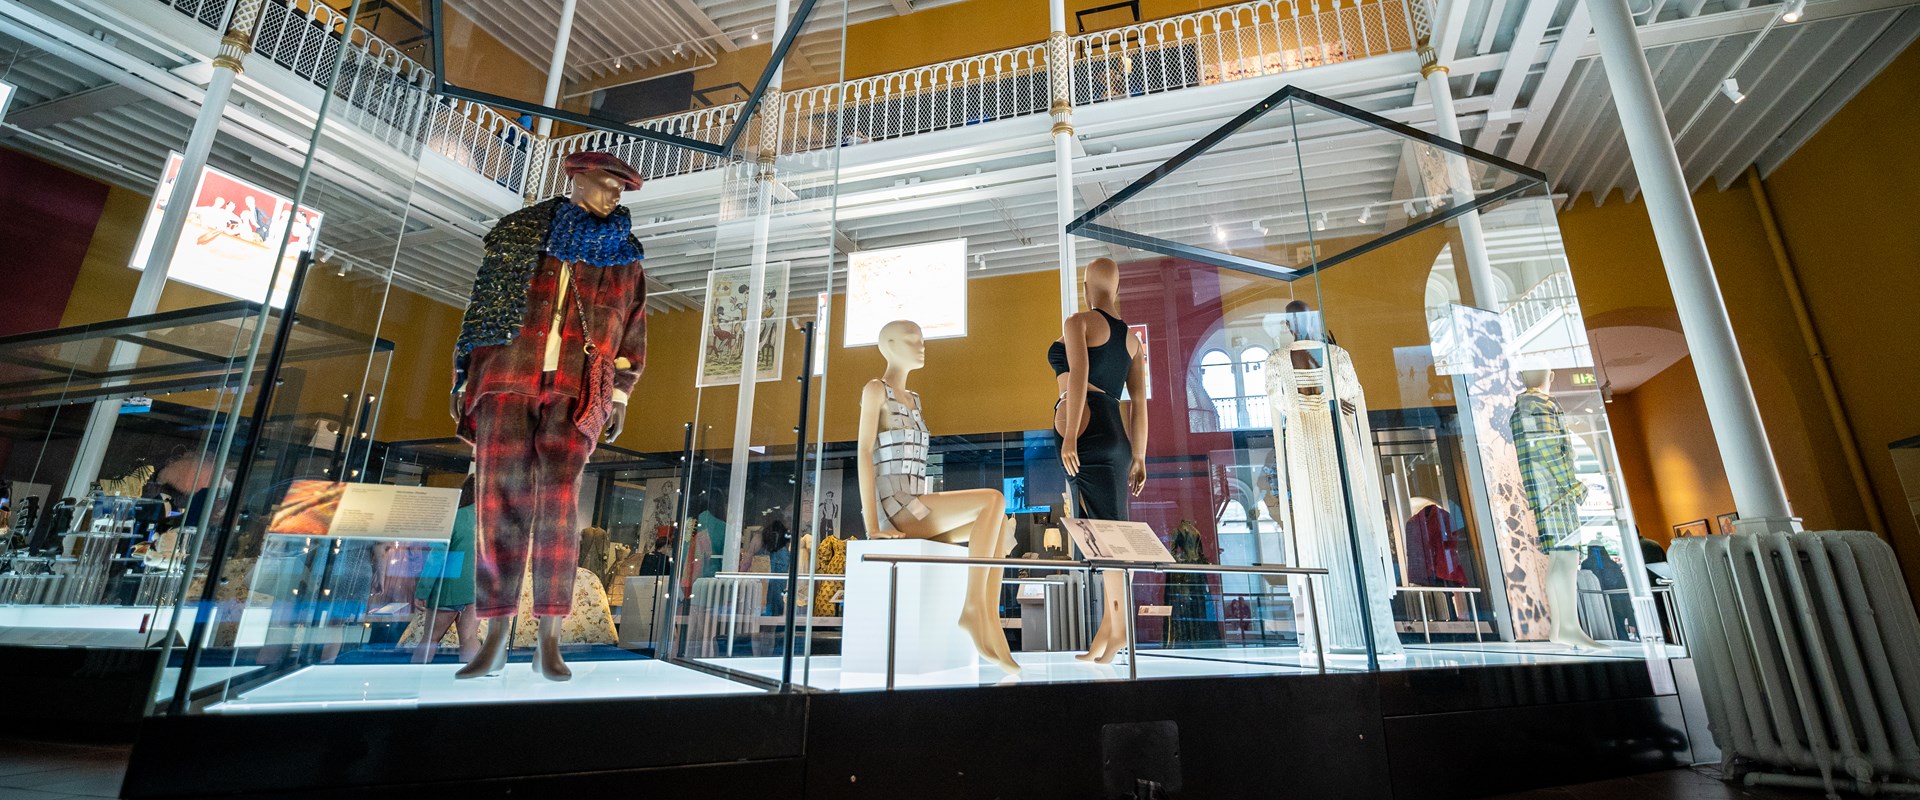 Five mannequins stand on a runway in our Fashion and Style Galleries featuring looks from designers.